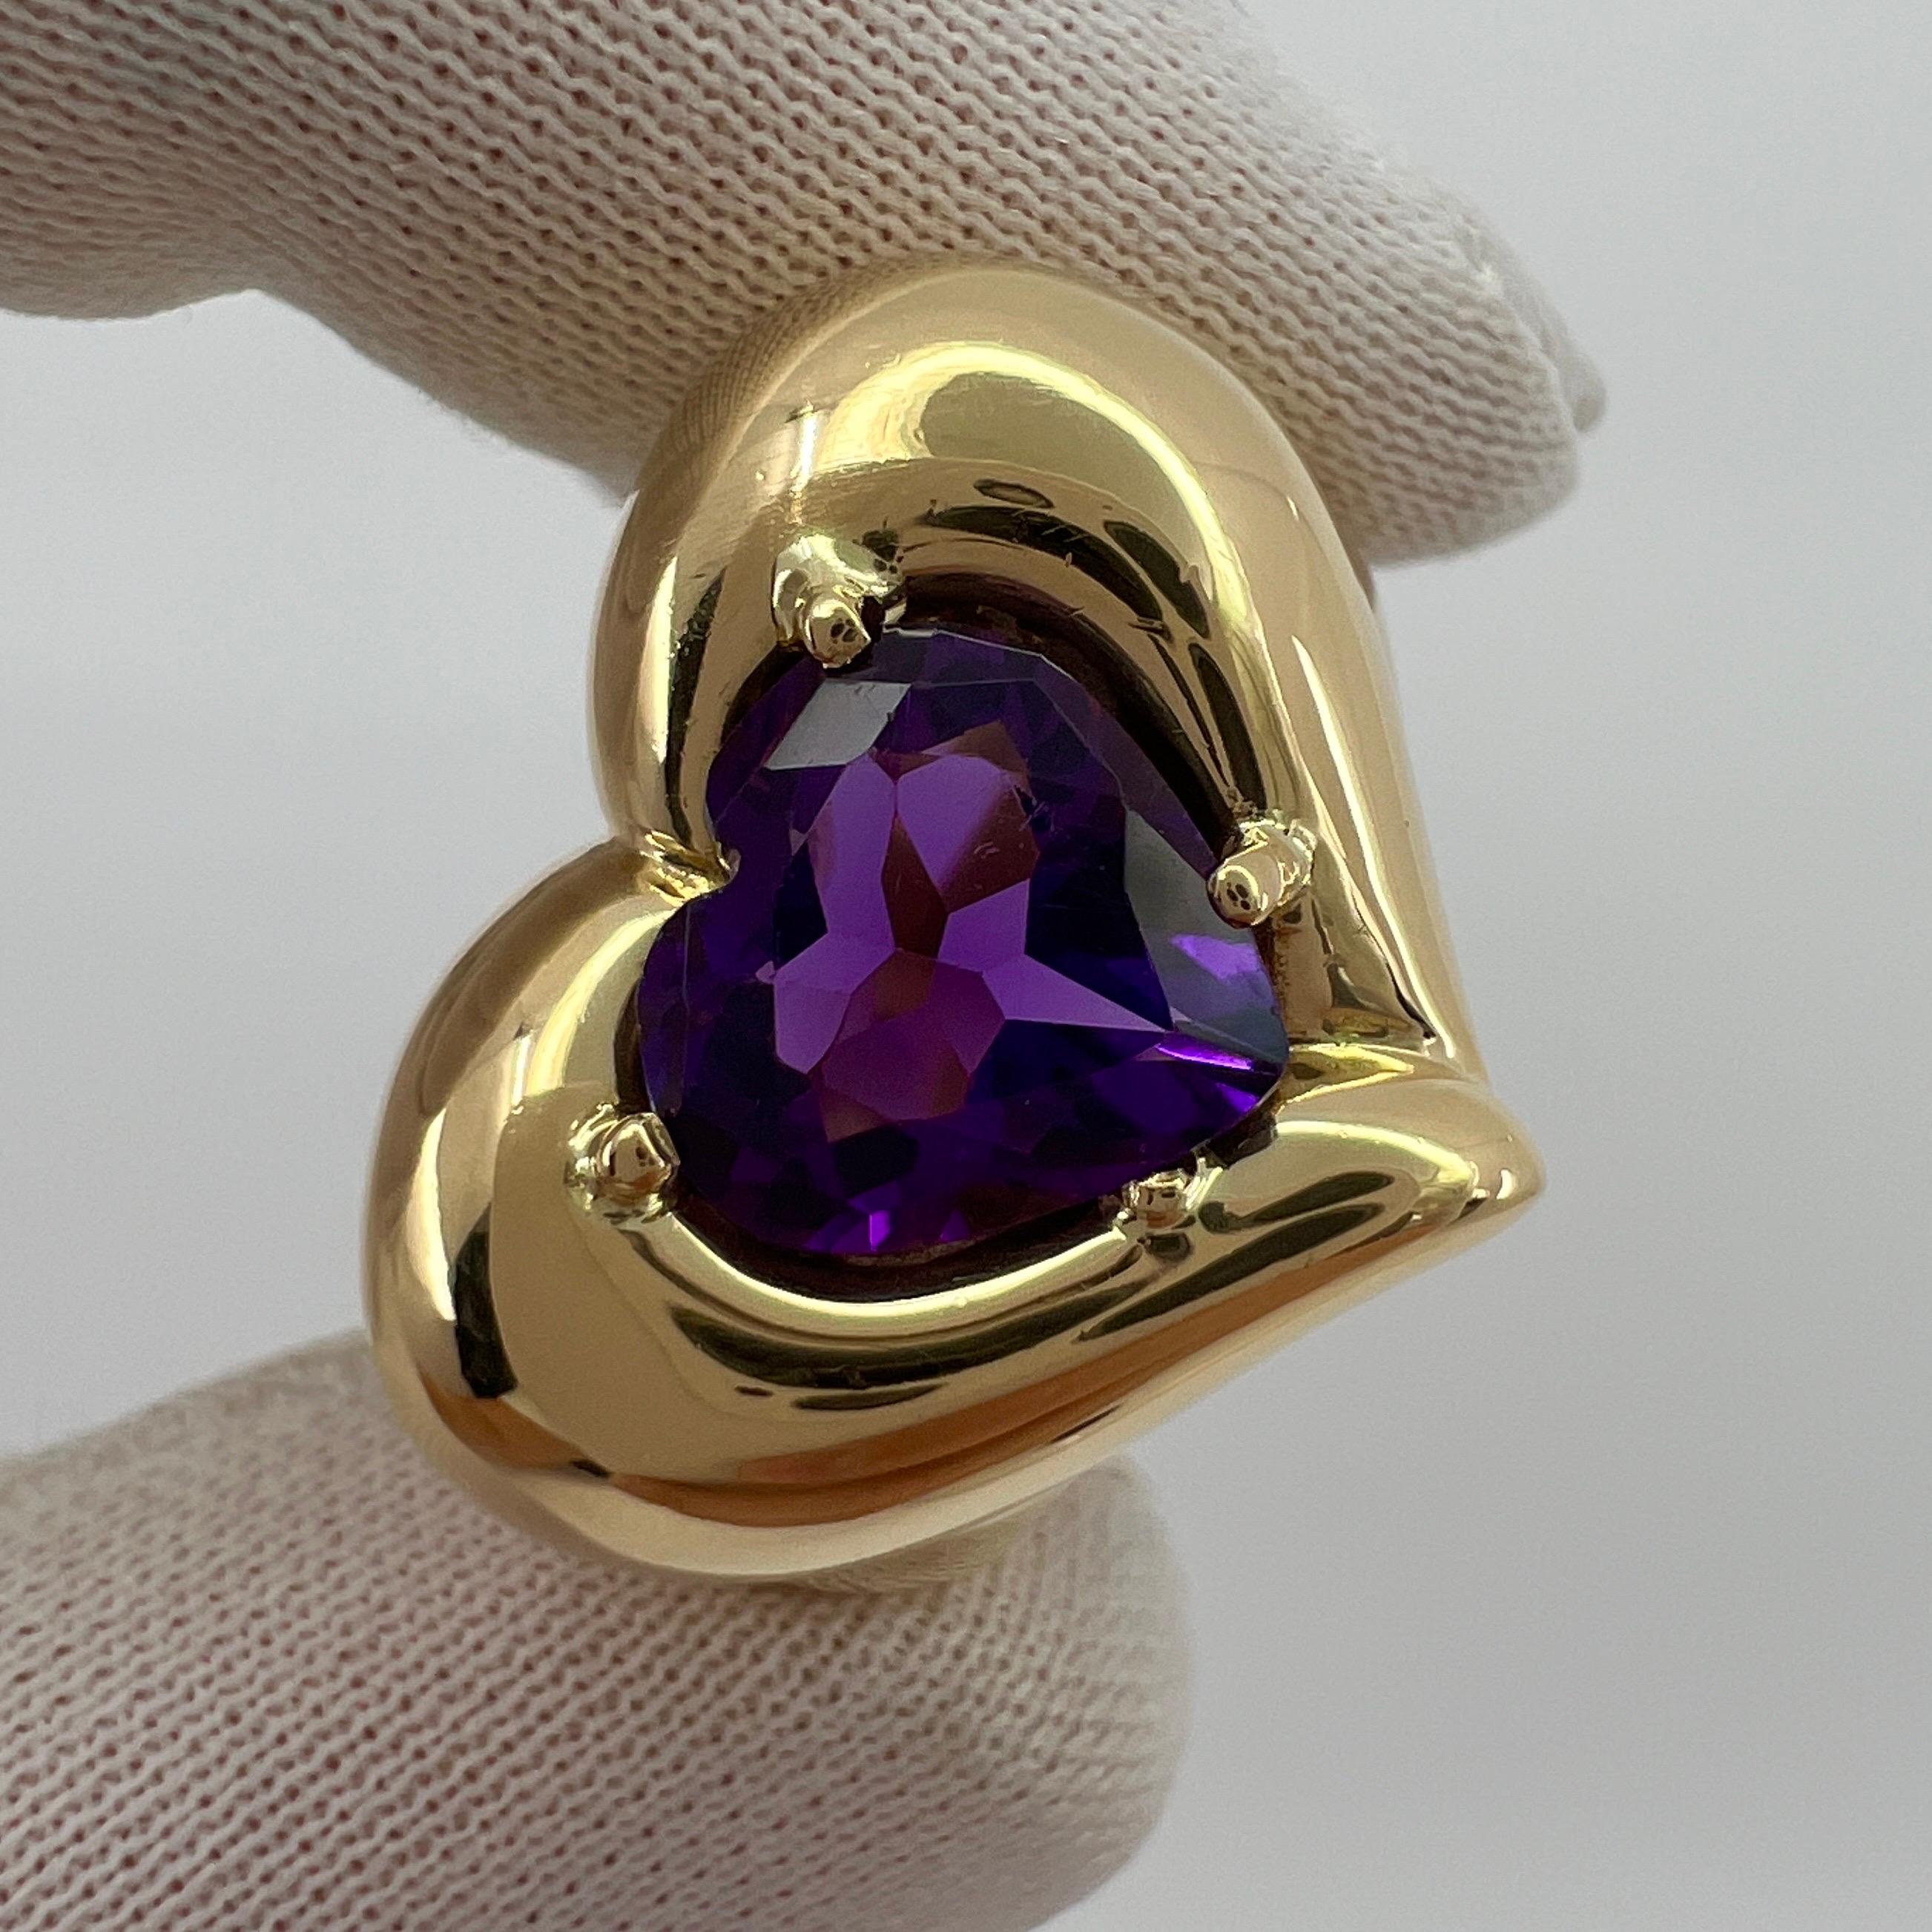 Rare Vintage Van Cleef & Arpels 18k Yellow Gold Amethyst Heart Ring with Box 2